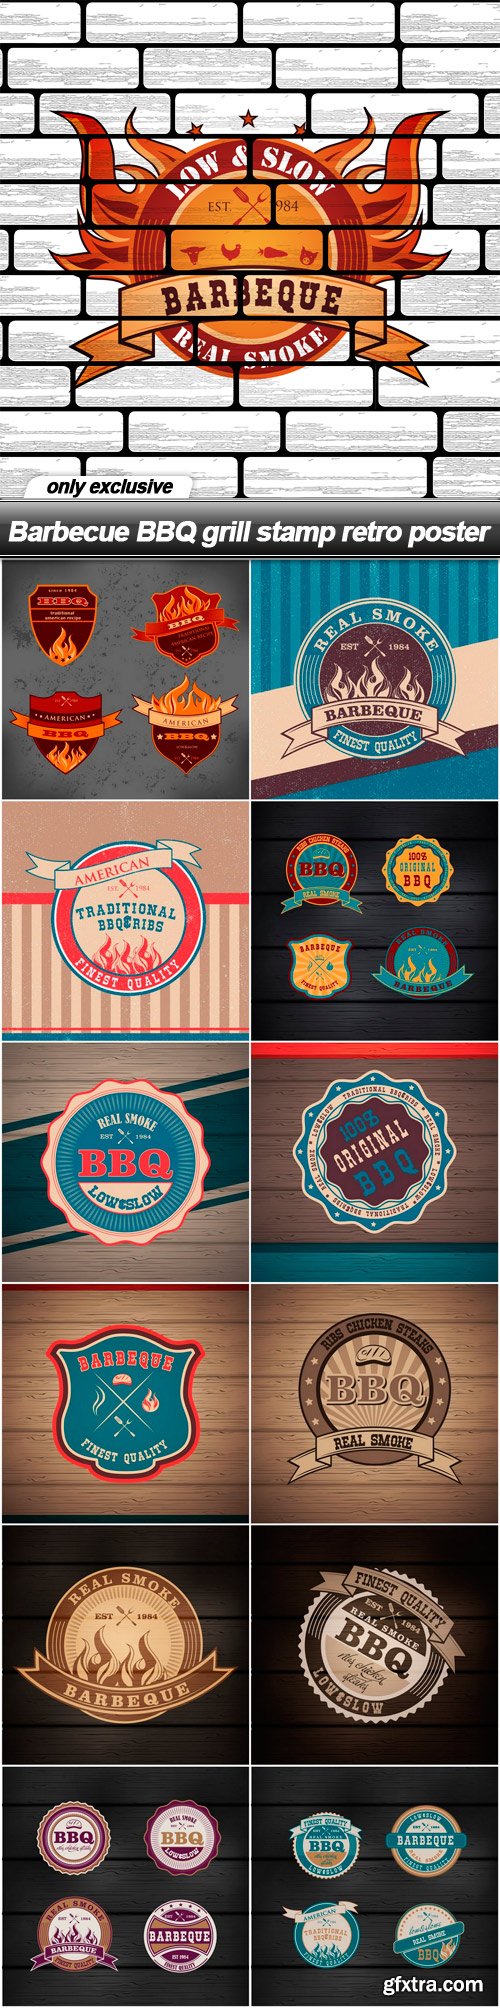 Barbecue BBQ grill stamp retro poster - 13 EPS